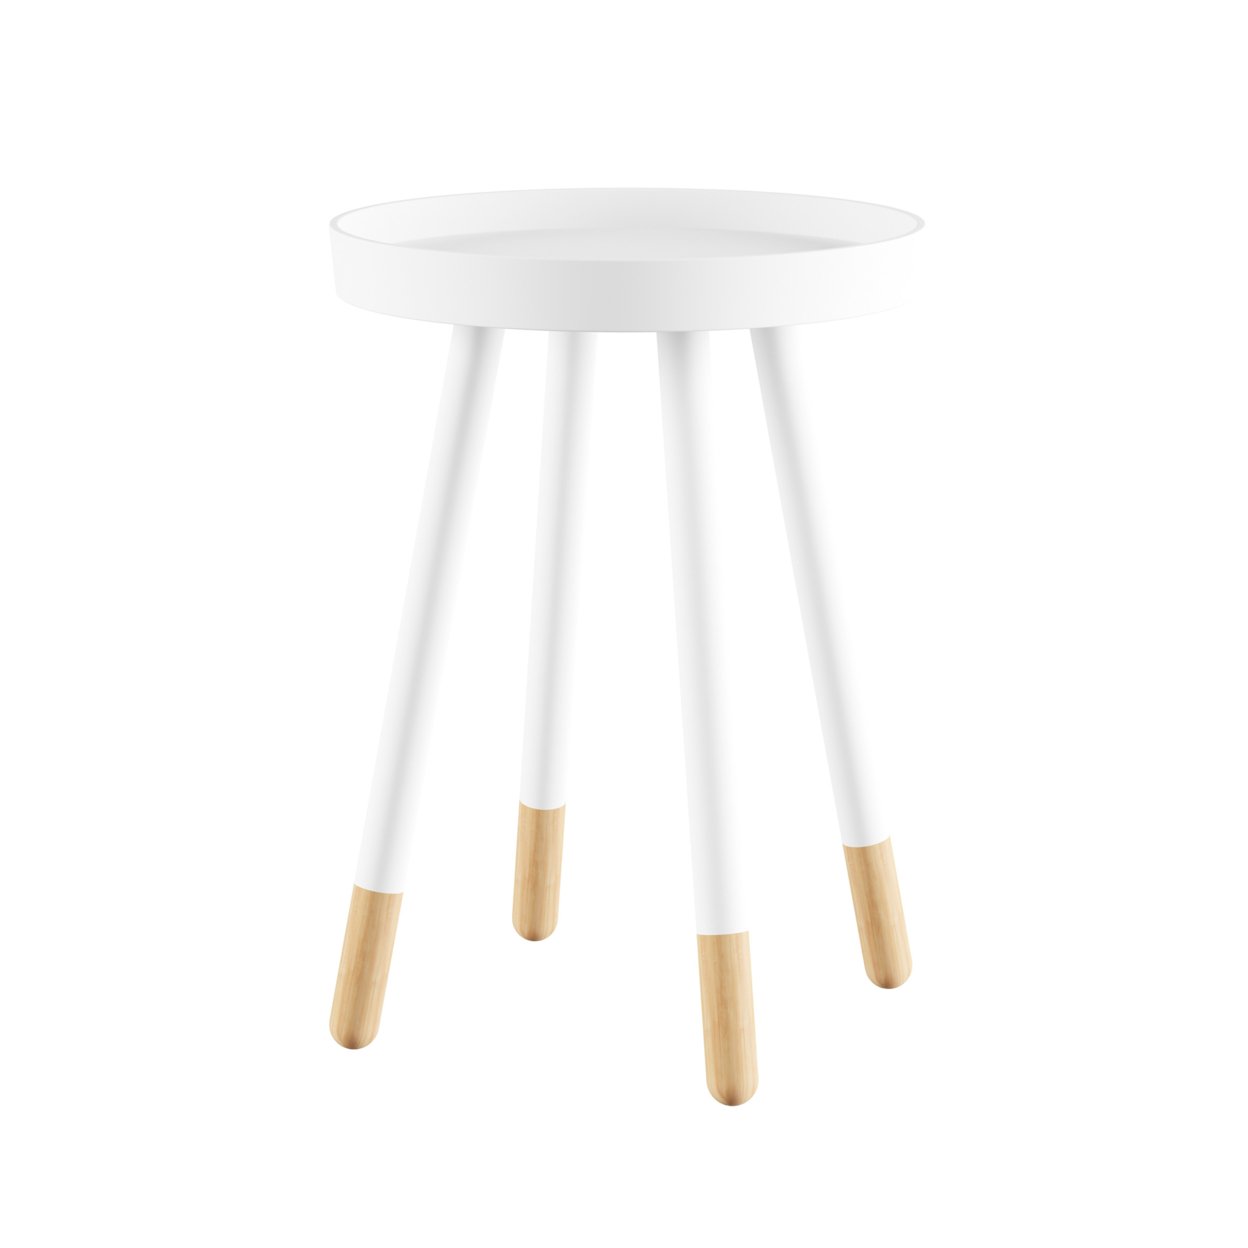 White End Table Round Mid-Century Modern Wooden Contemporary Decor Display And Home Accent Table